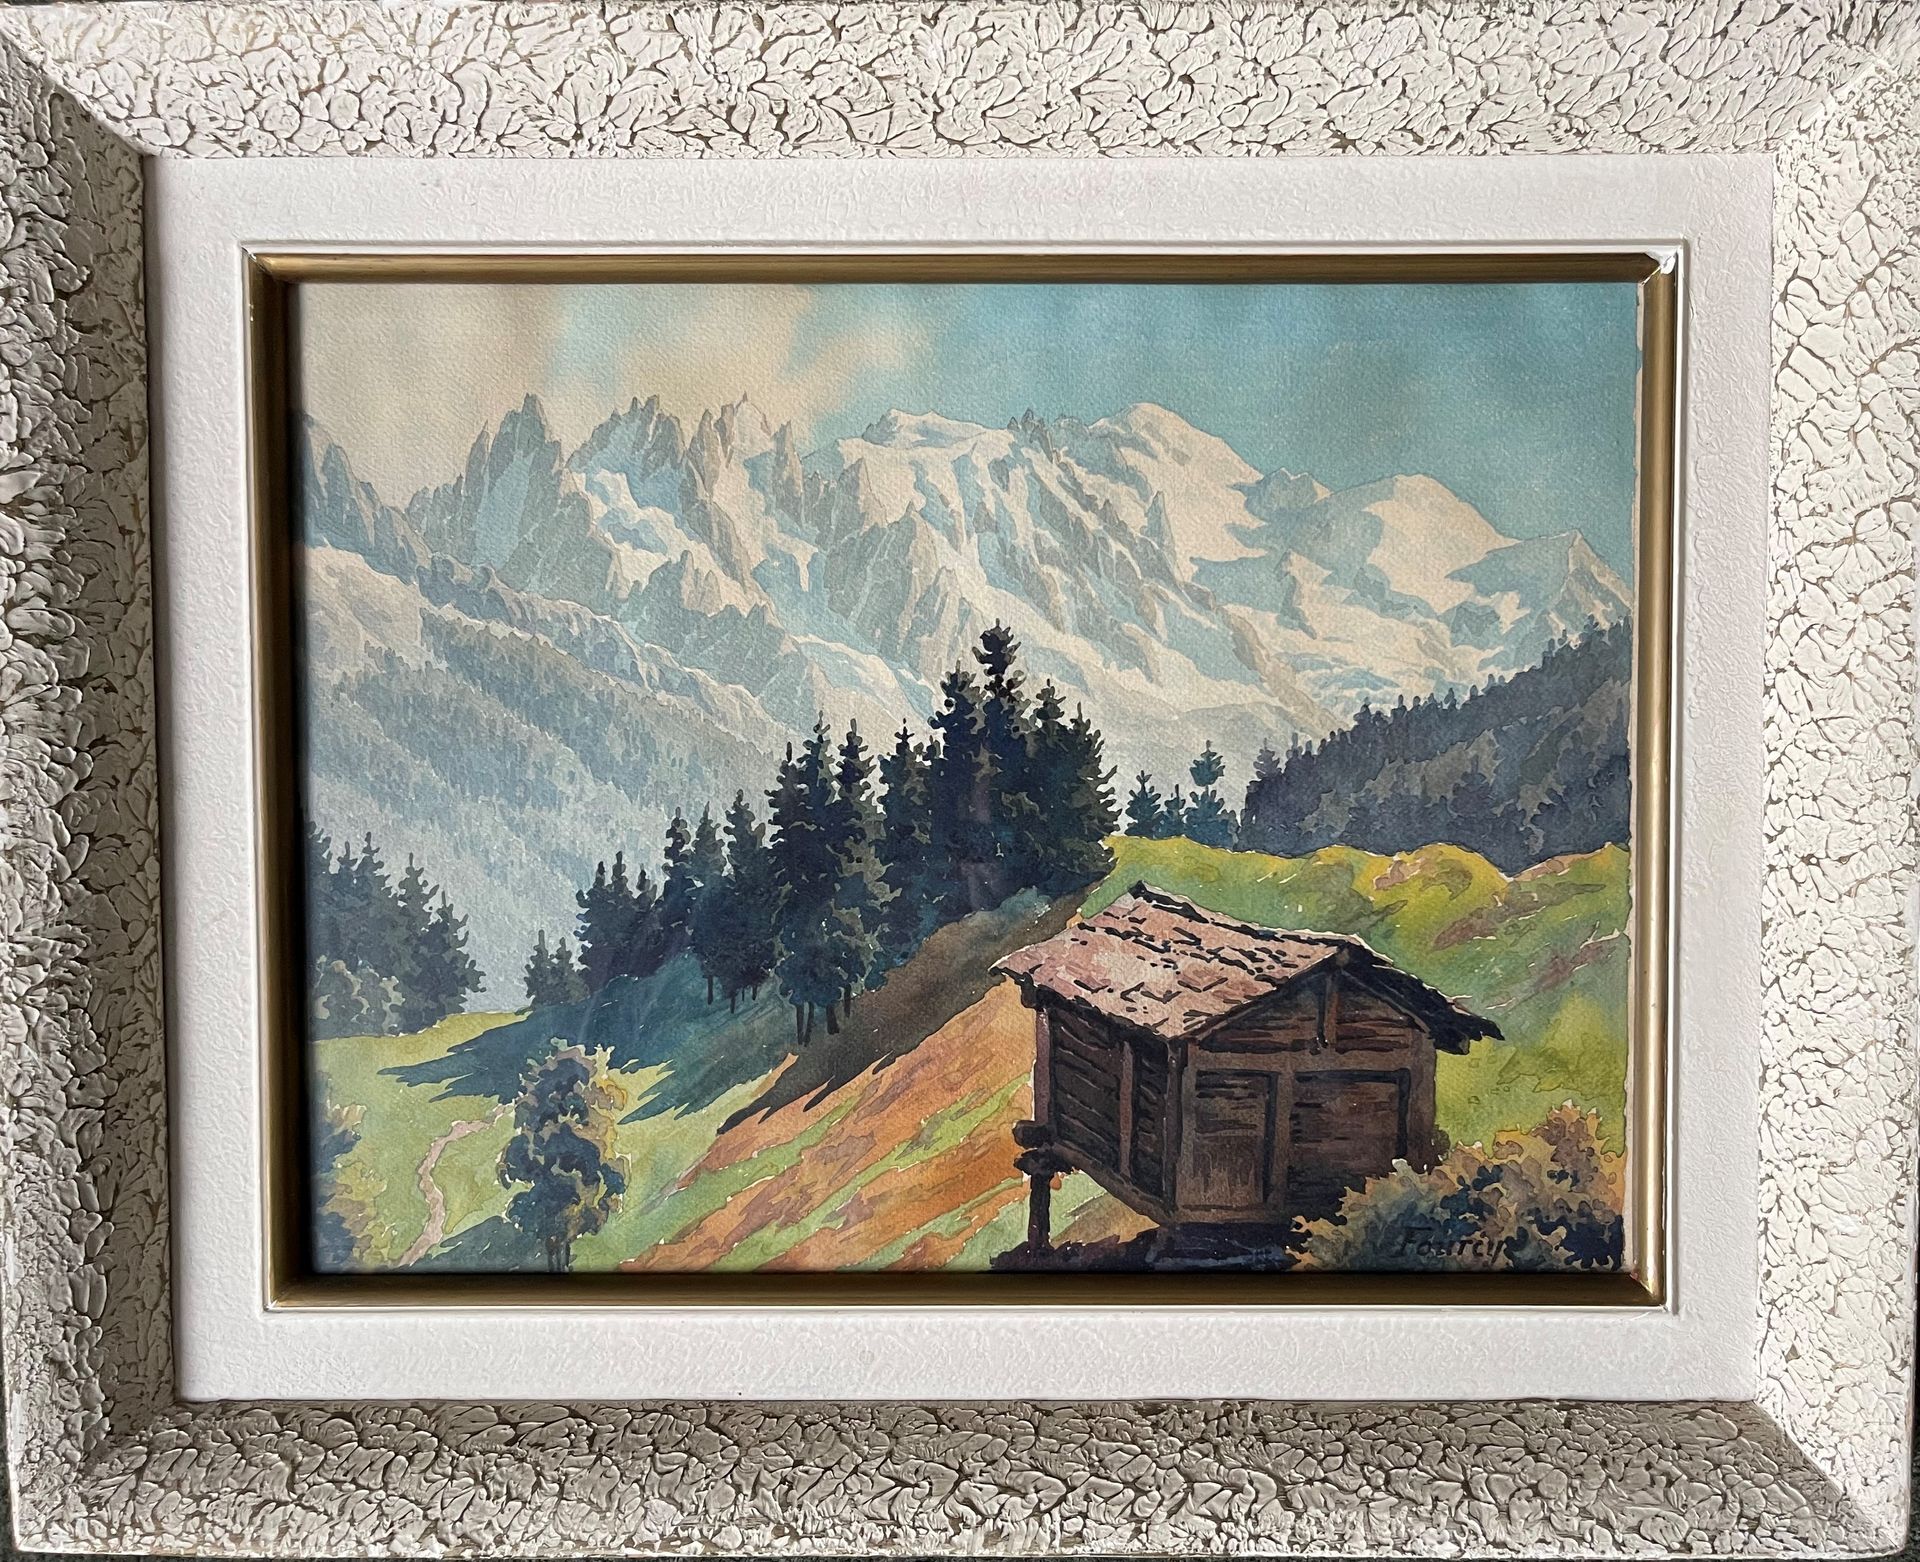 Null Jacques FOURCY (1906-1990)

The Mont-Blanc and the needles of Chamonix

Wat&hellip;